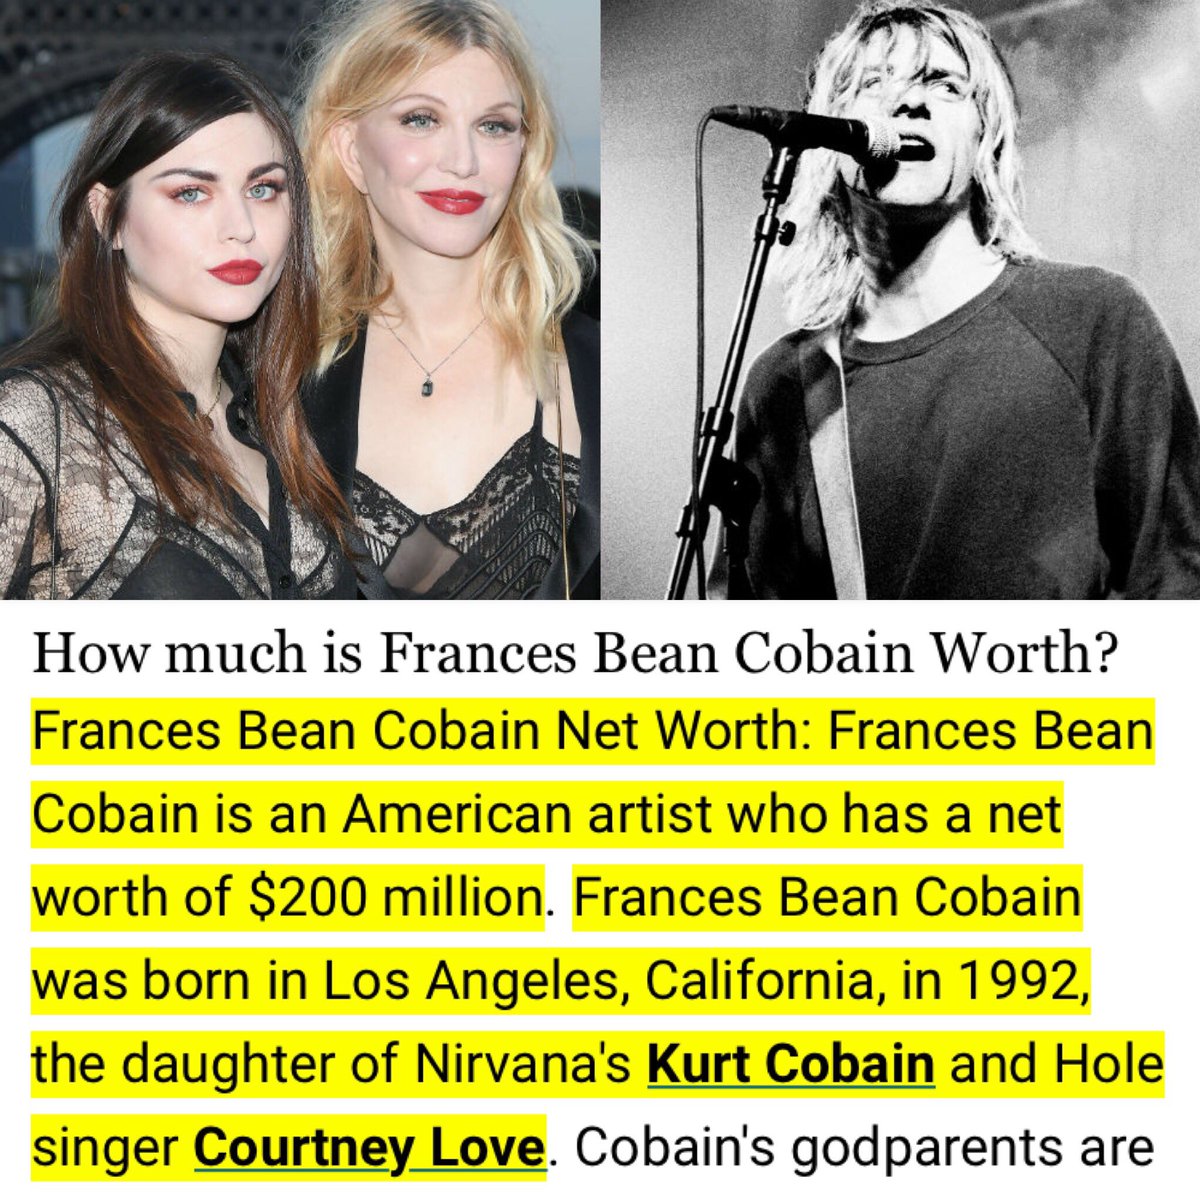 On December 11th, 2009, Judge Goetz agrees to a put Courtney Love's child Frances Bean Cobain under a conservatorship. Frances owns the publicity rights to her father Kurt Cobain's name and likeness. Notice it's the same attorneys who work for Britney's father!  #FreeBritney